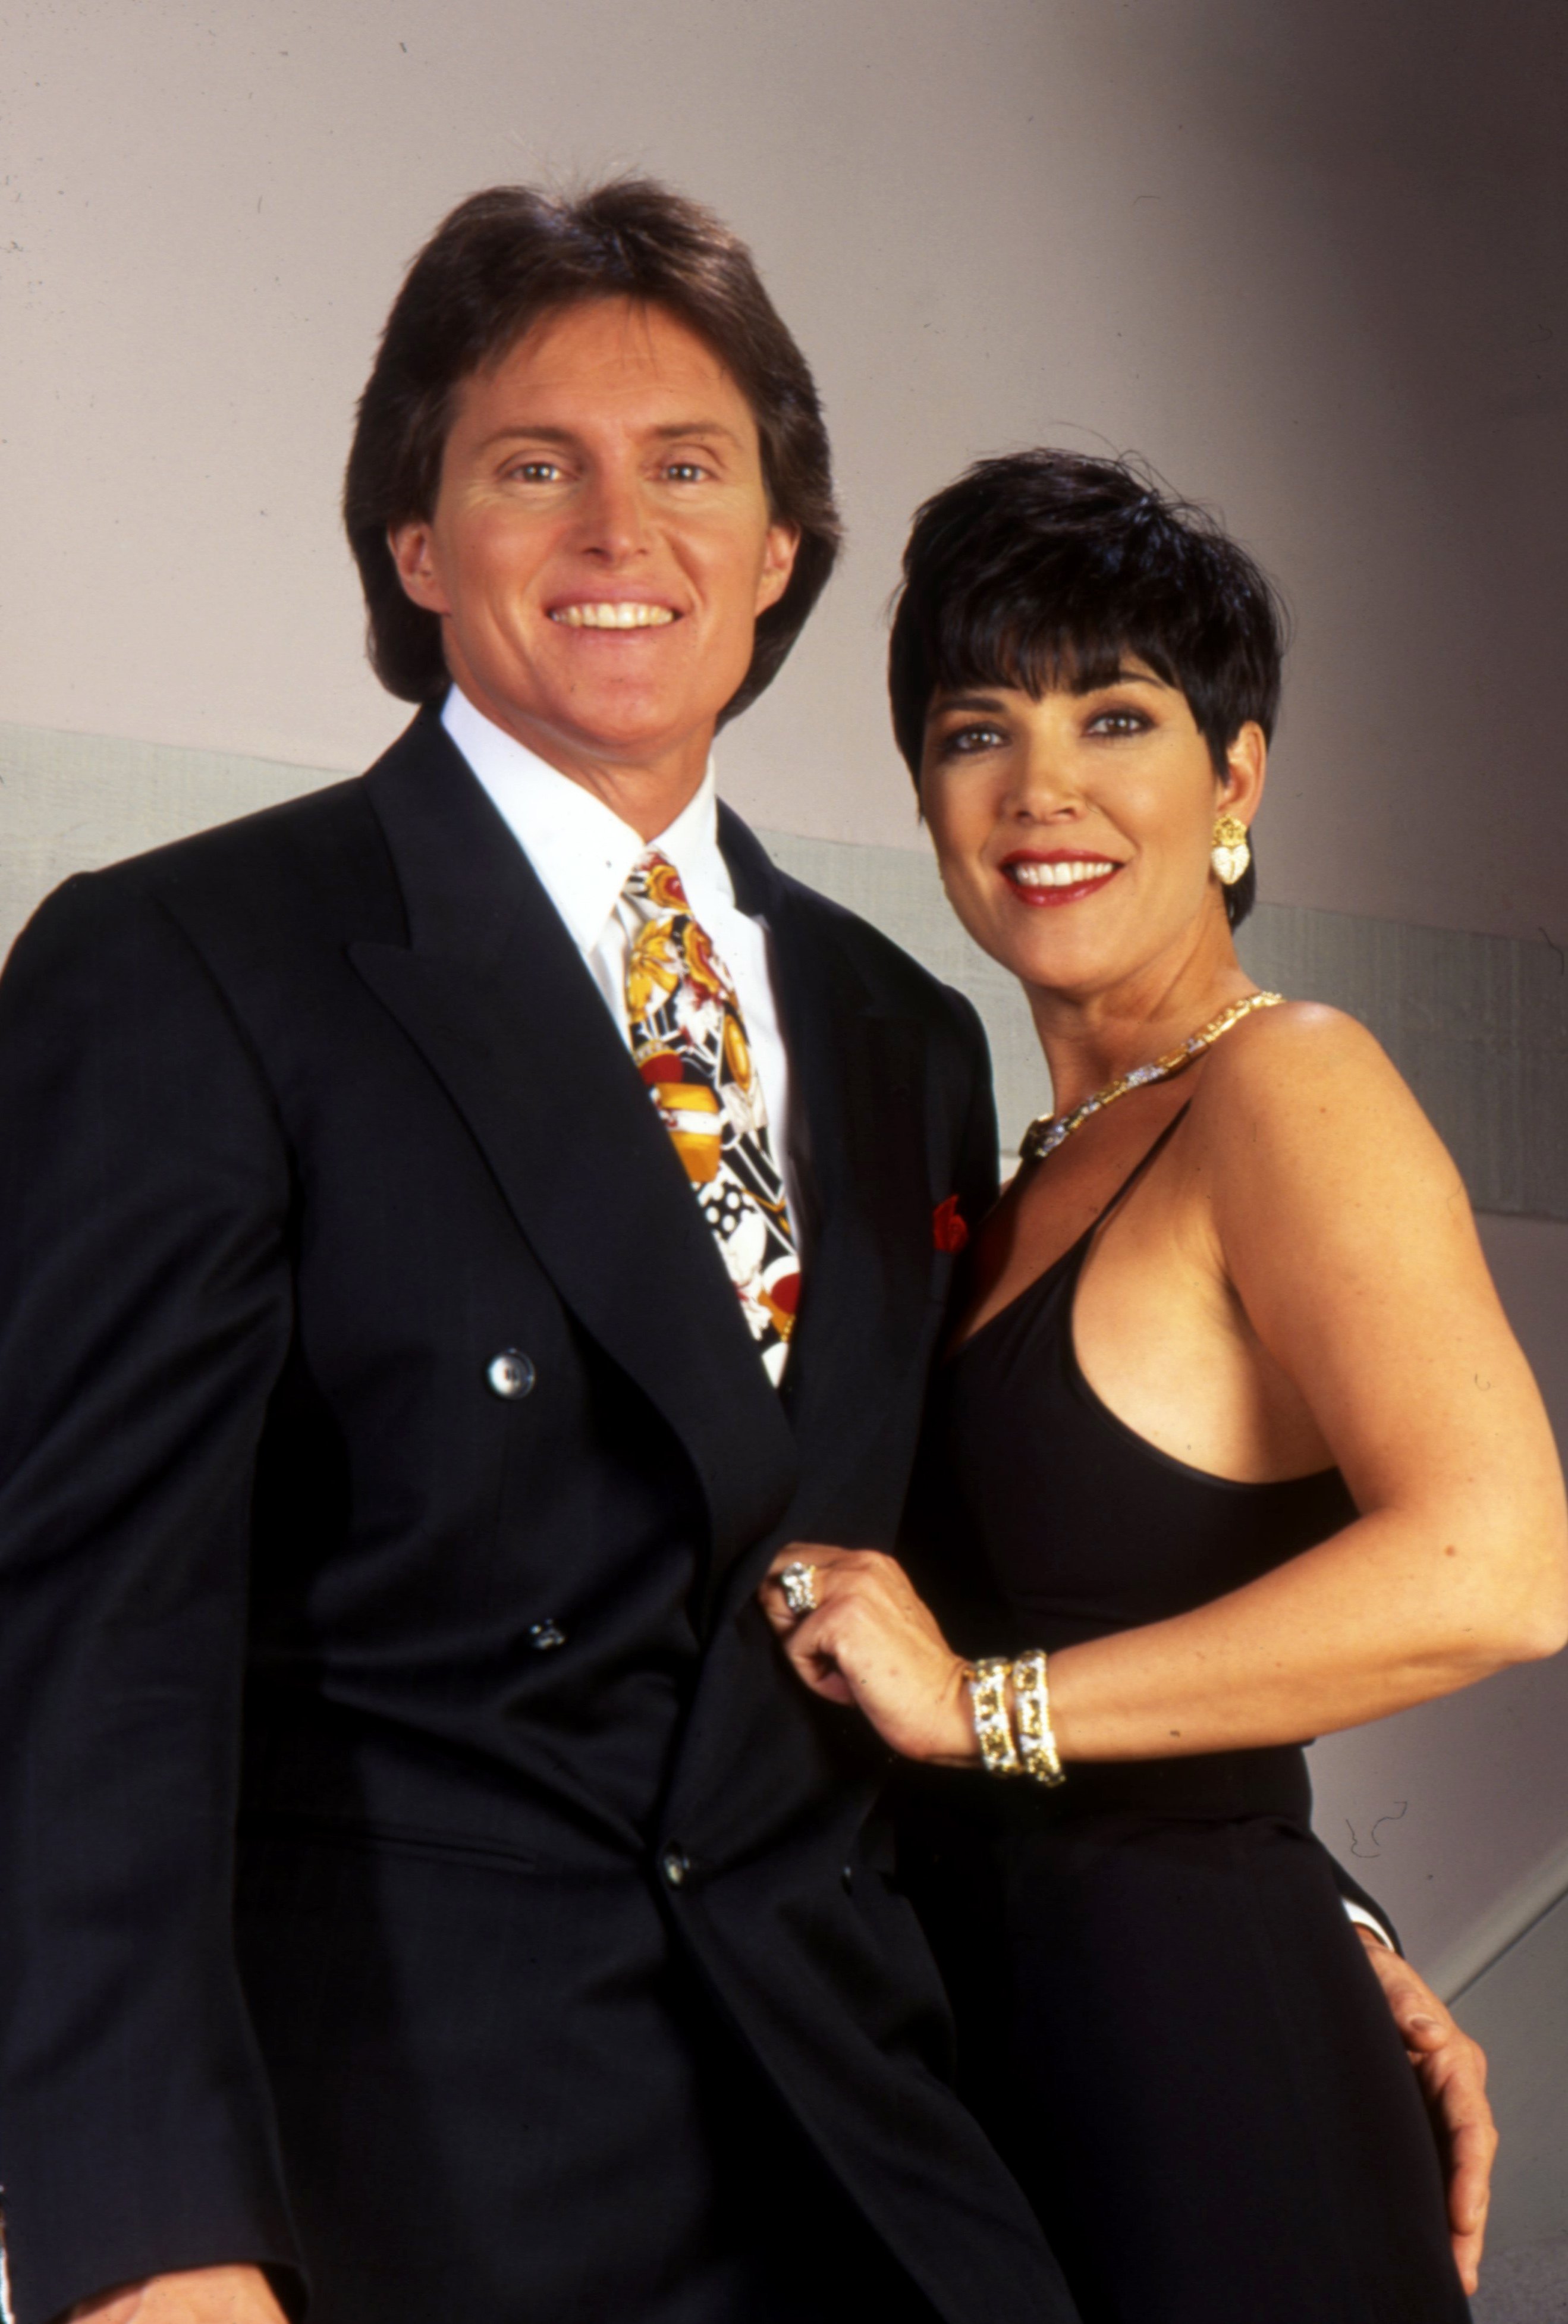 Bruce Jenner and Kris Jenner pose for a portrait in Los Angeles, California in 1991 | Source: Getty Images